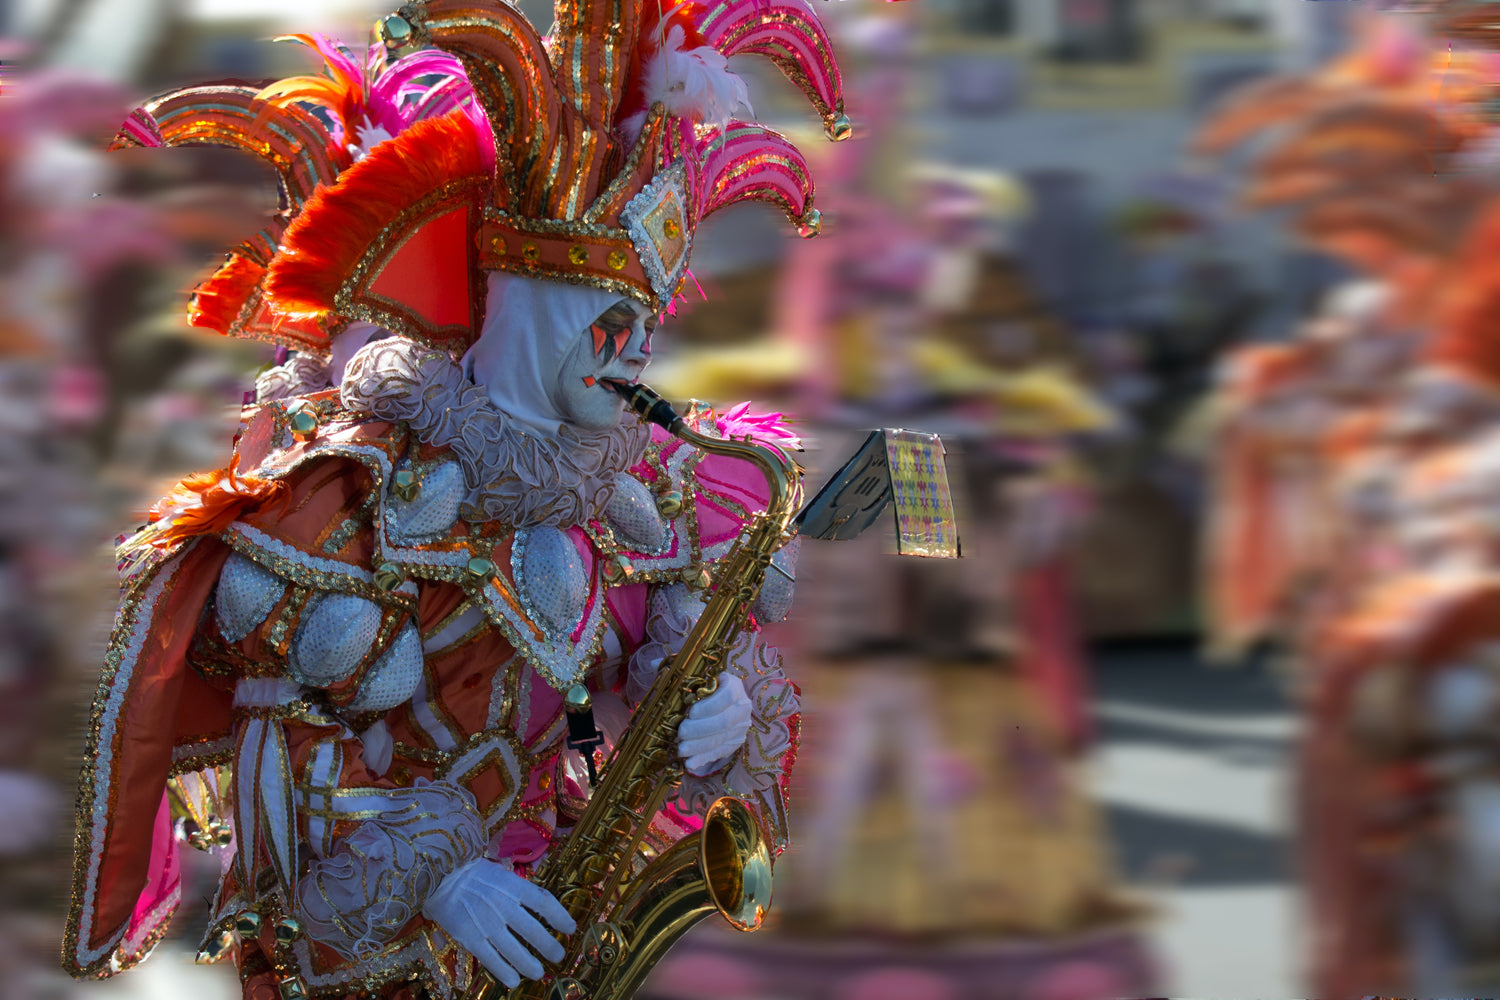 The Mummers Parade - What the Heck is it?